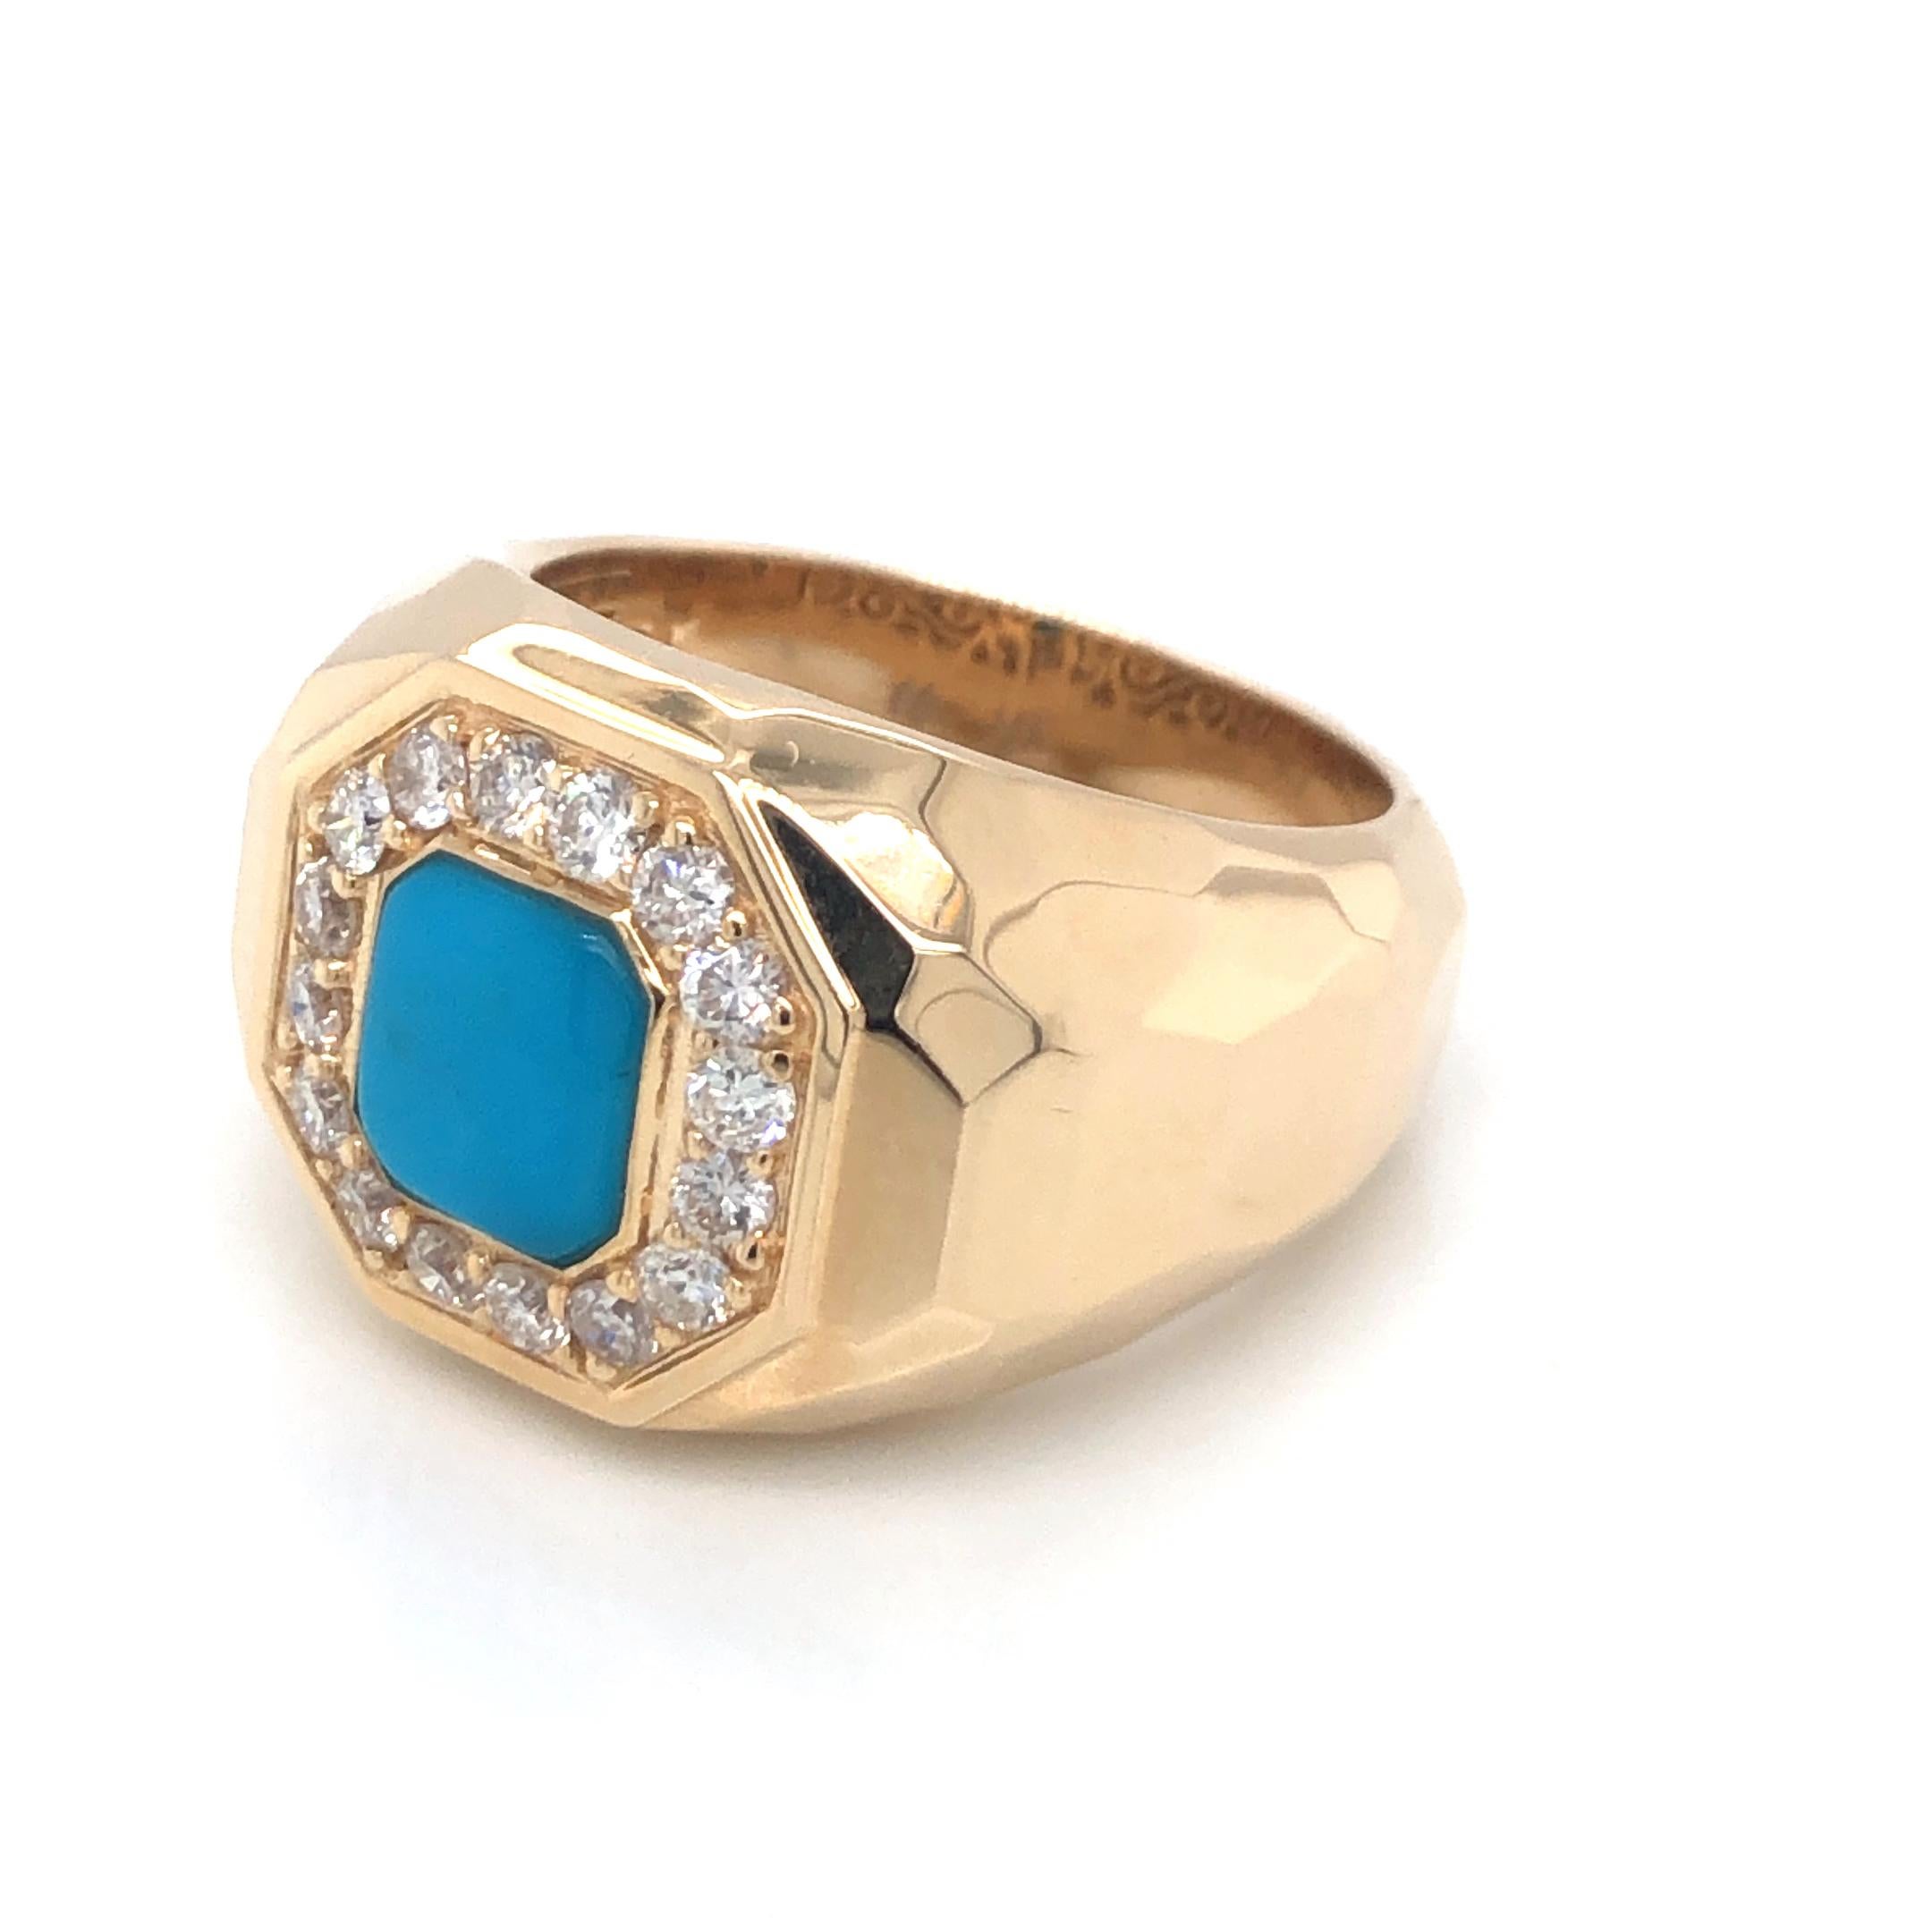 Turquoise 1.3 ct And 16 Diamonds 0.87ctw Gentleman's Rings 14k Yellow Gold Size 10.5